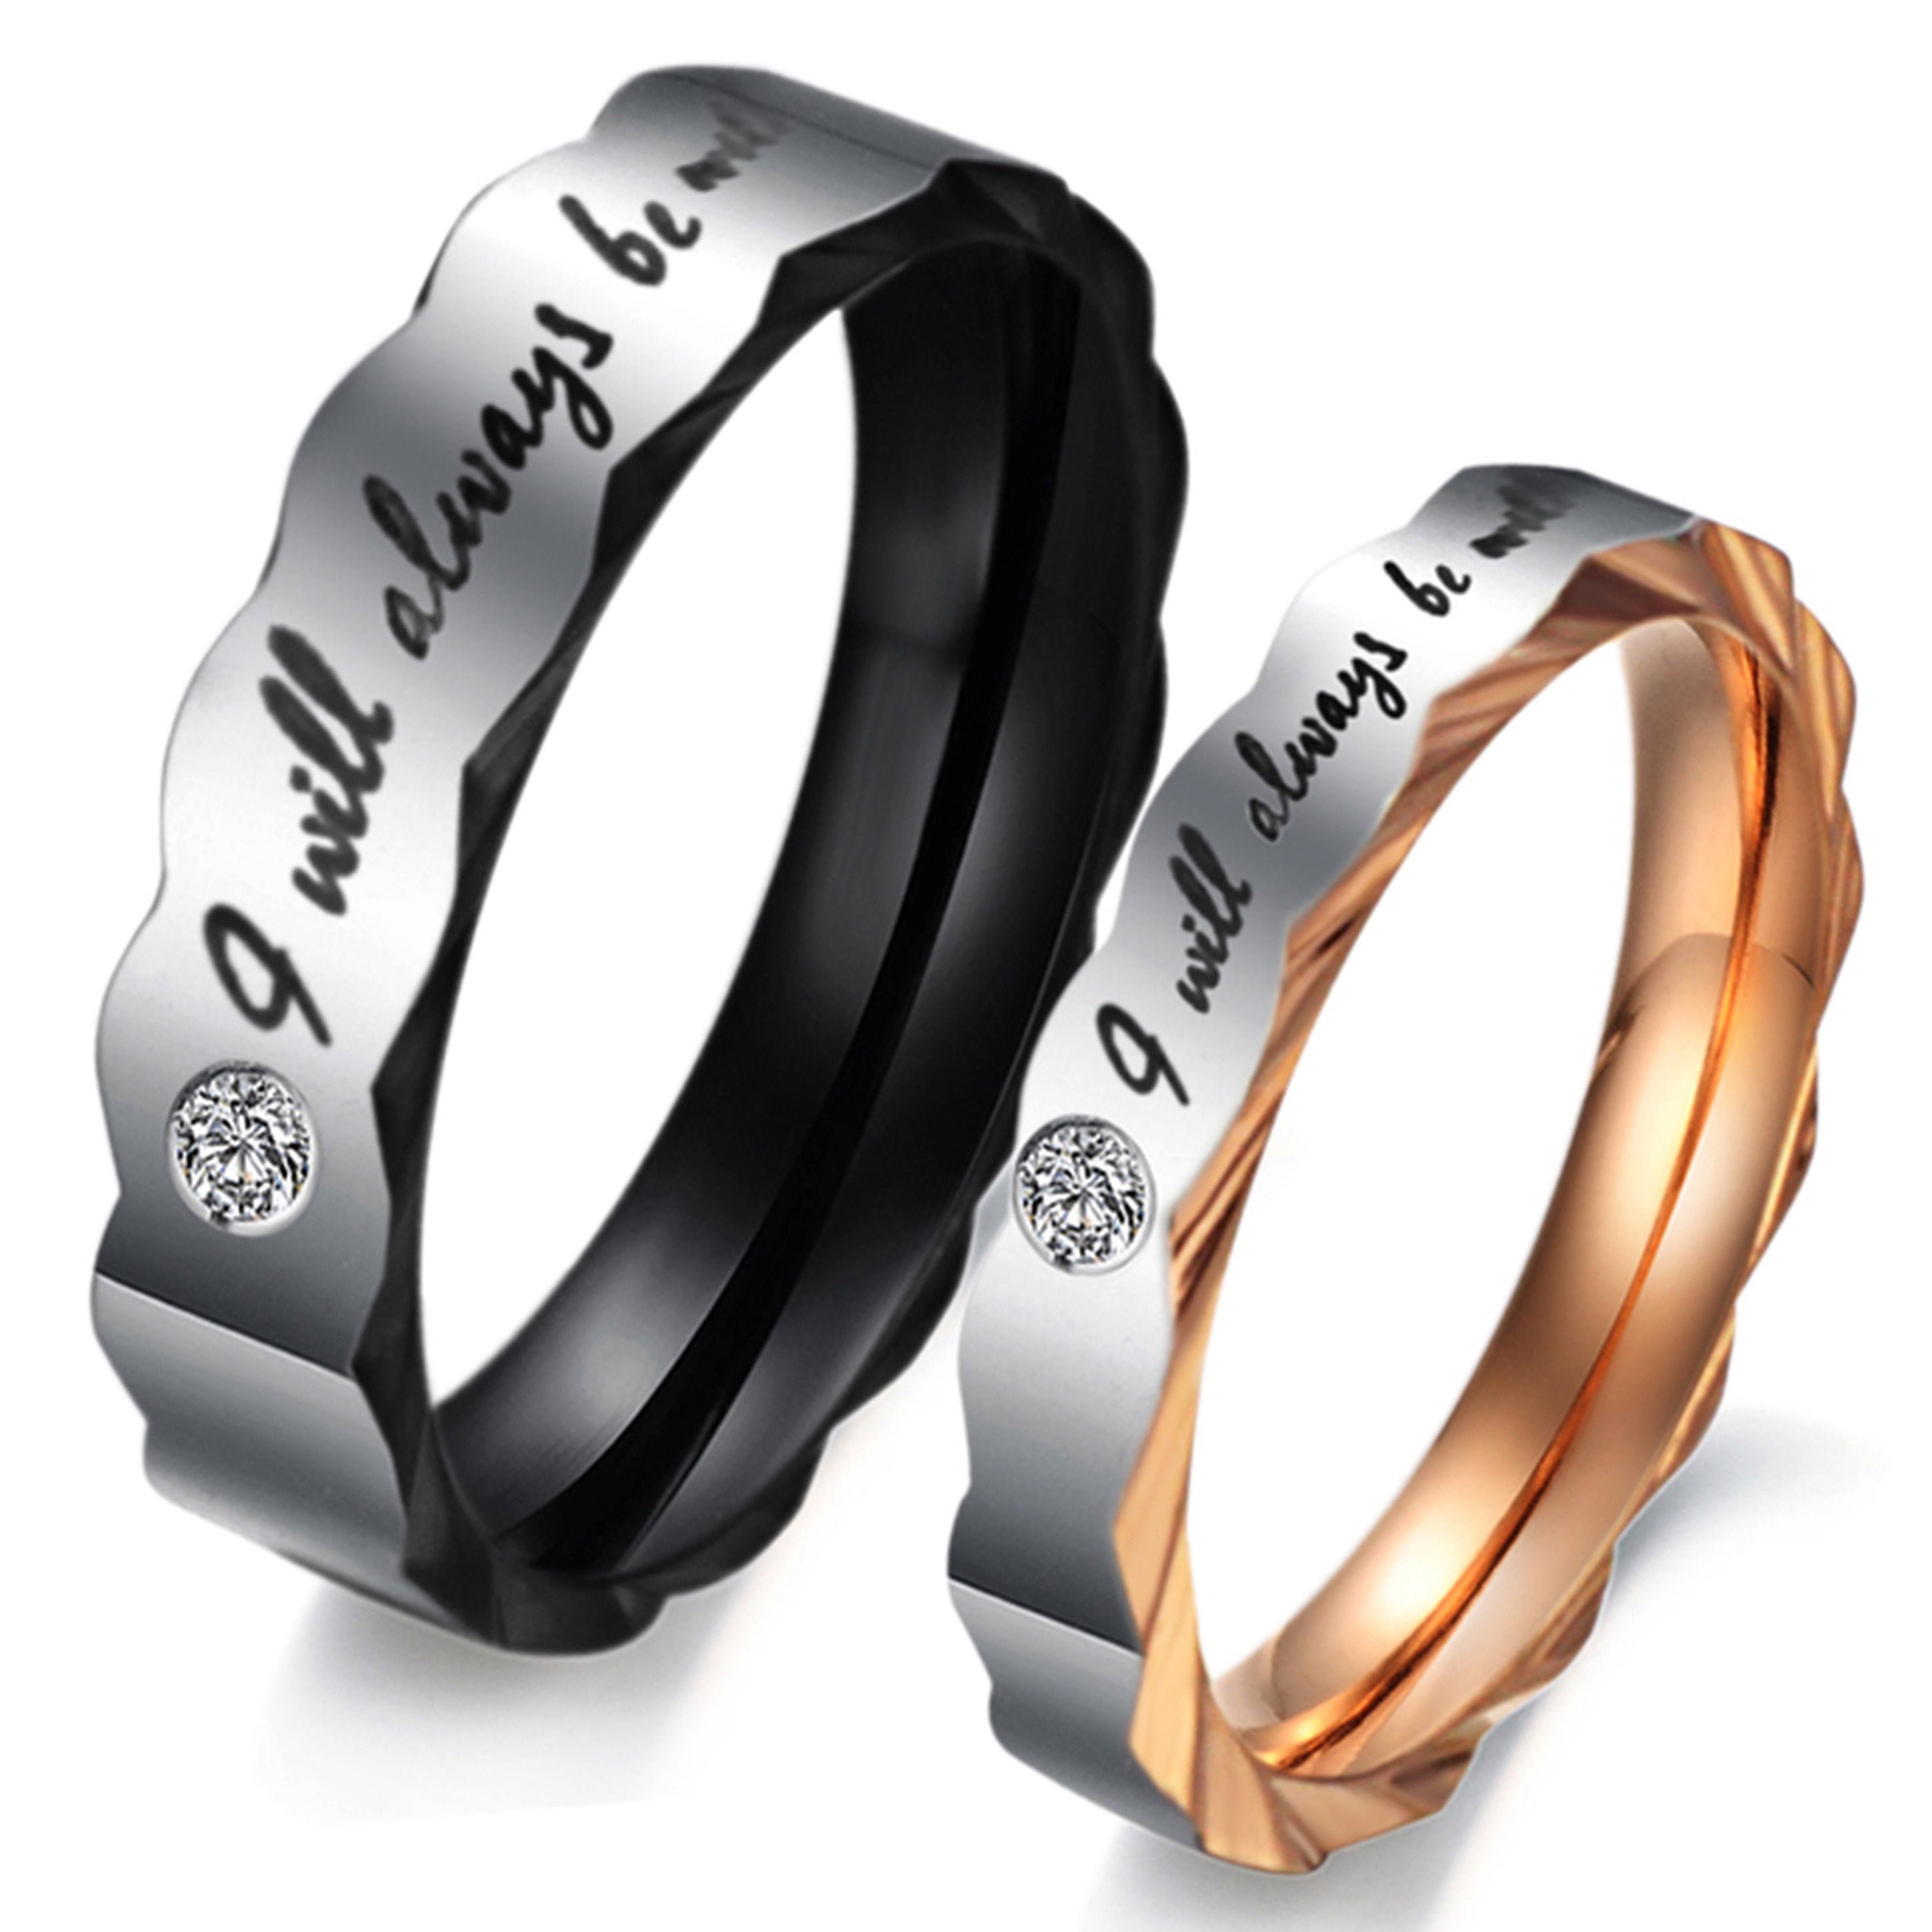 UM Jewelry Stainless Steel Promise Couple Rings for Him and Her Matching Wedding Rings Bands 